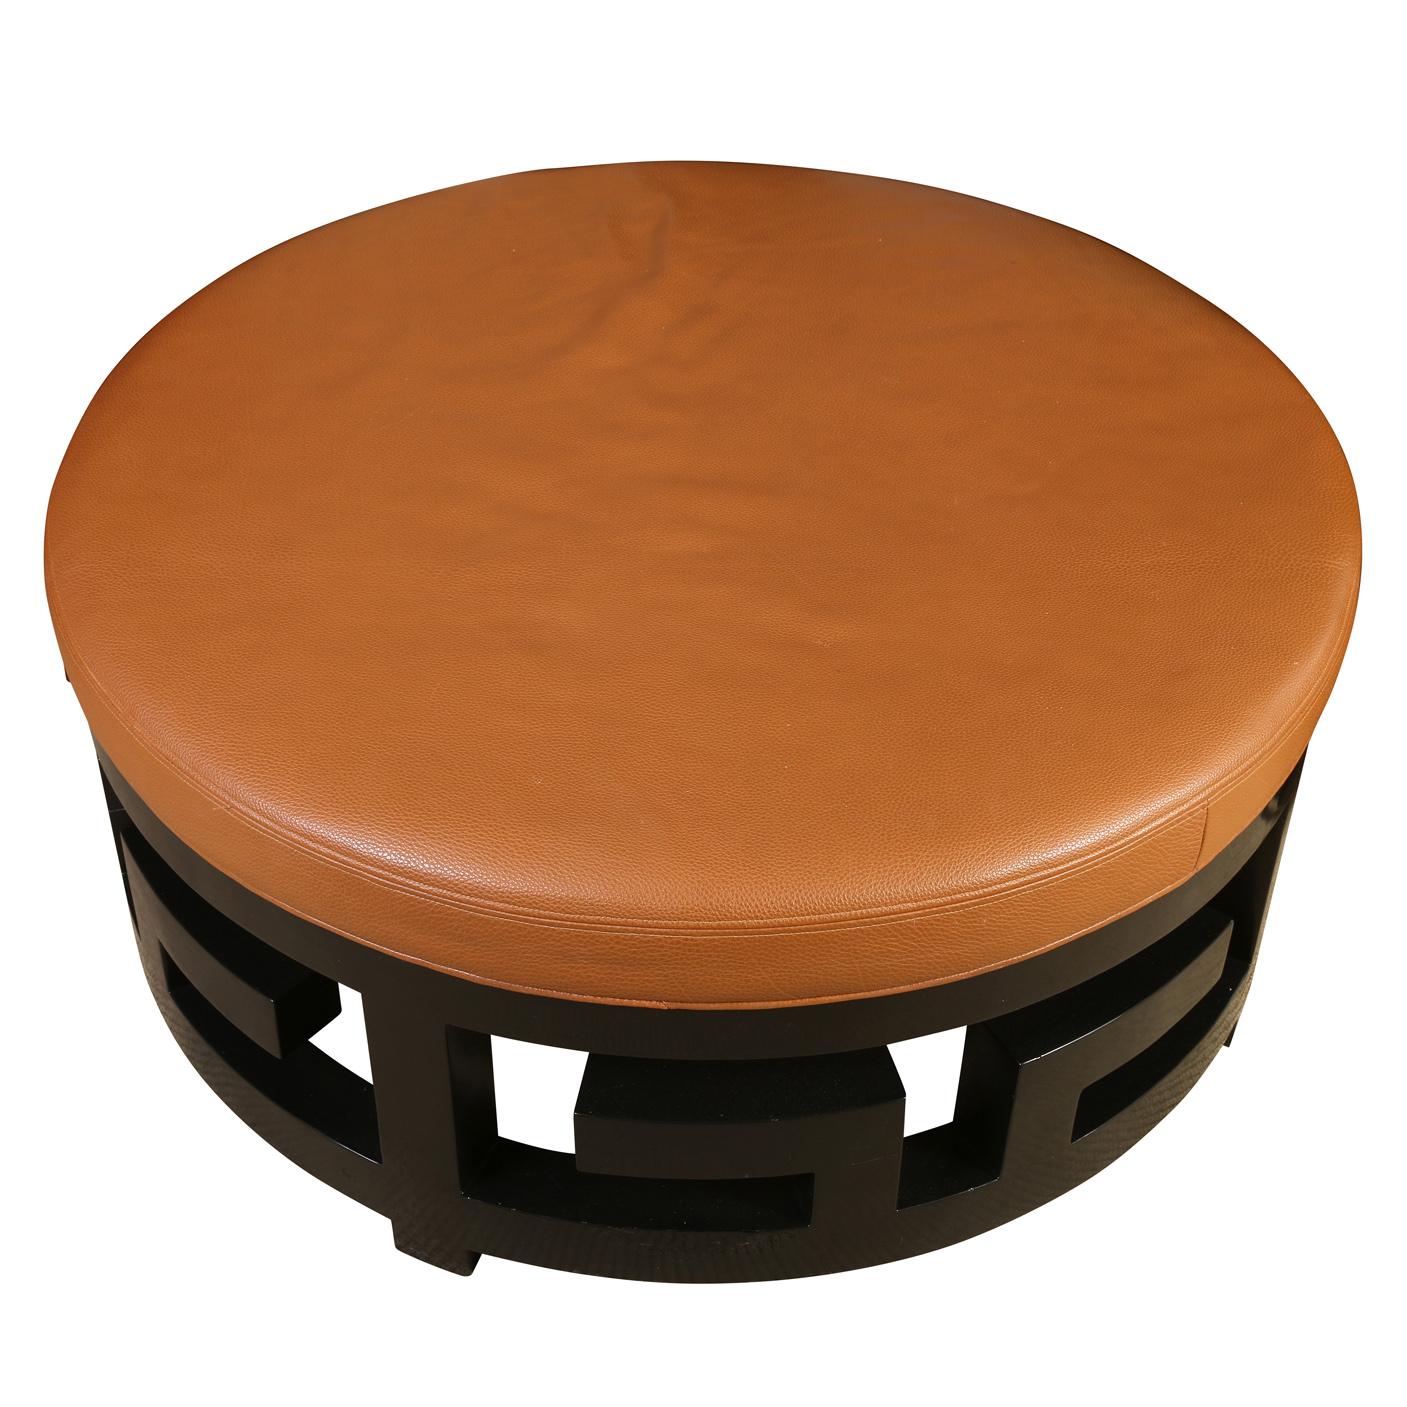 A circular pebbled leather ottoman with a black fretwork base giving it an Asian Modern style. Functional and beautiful both.